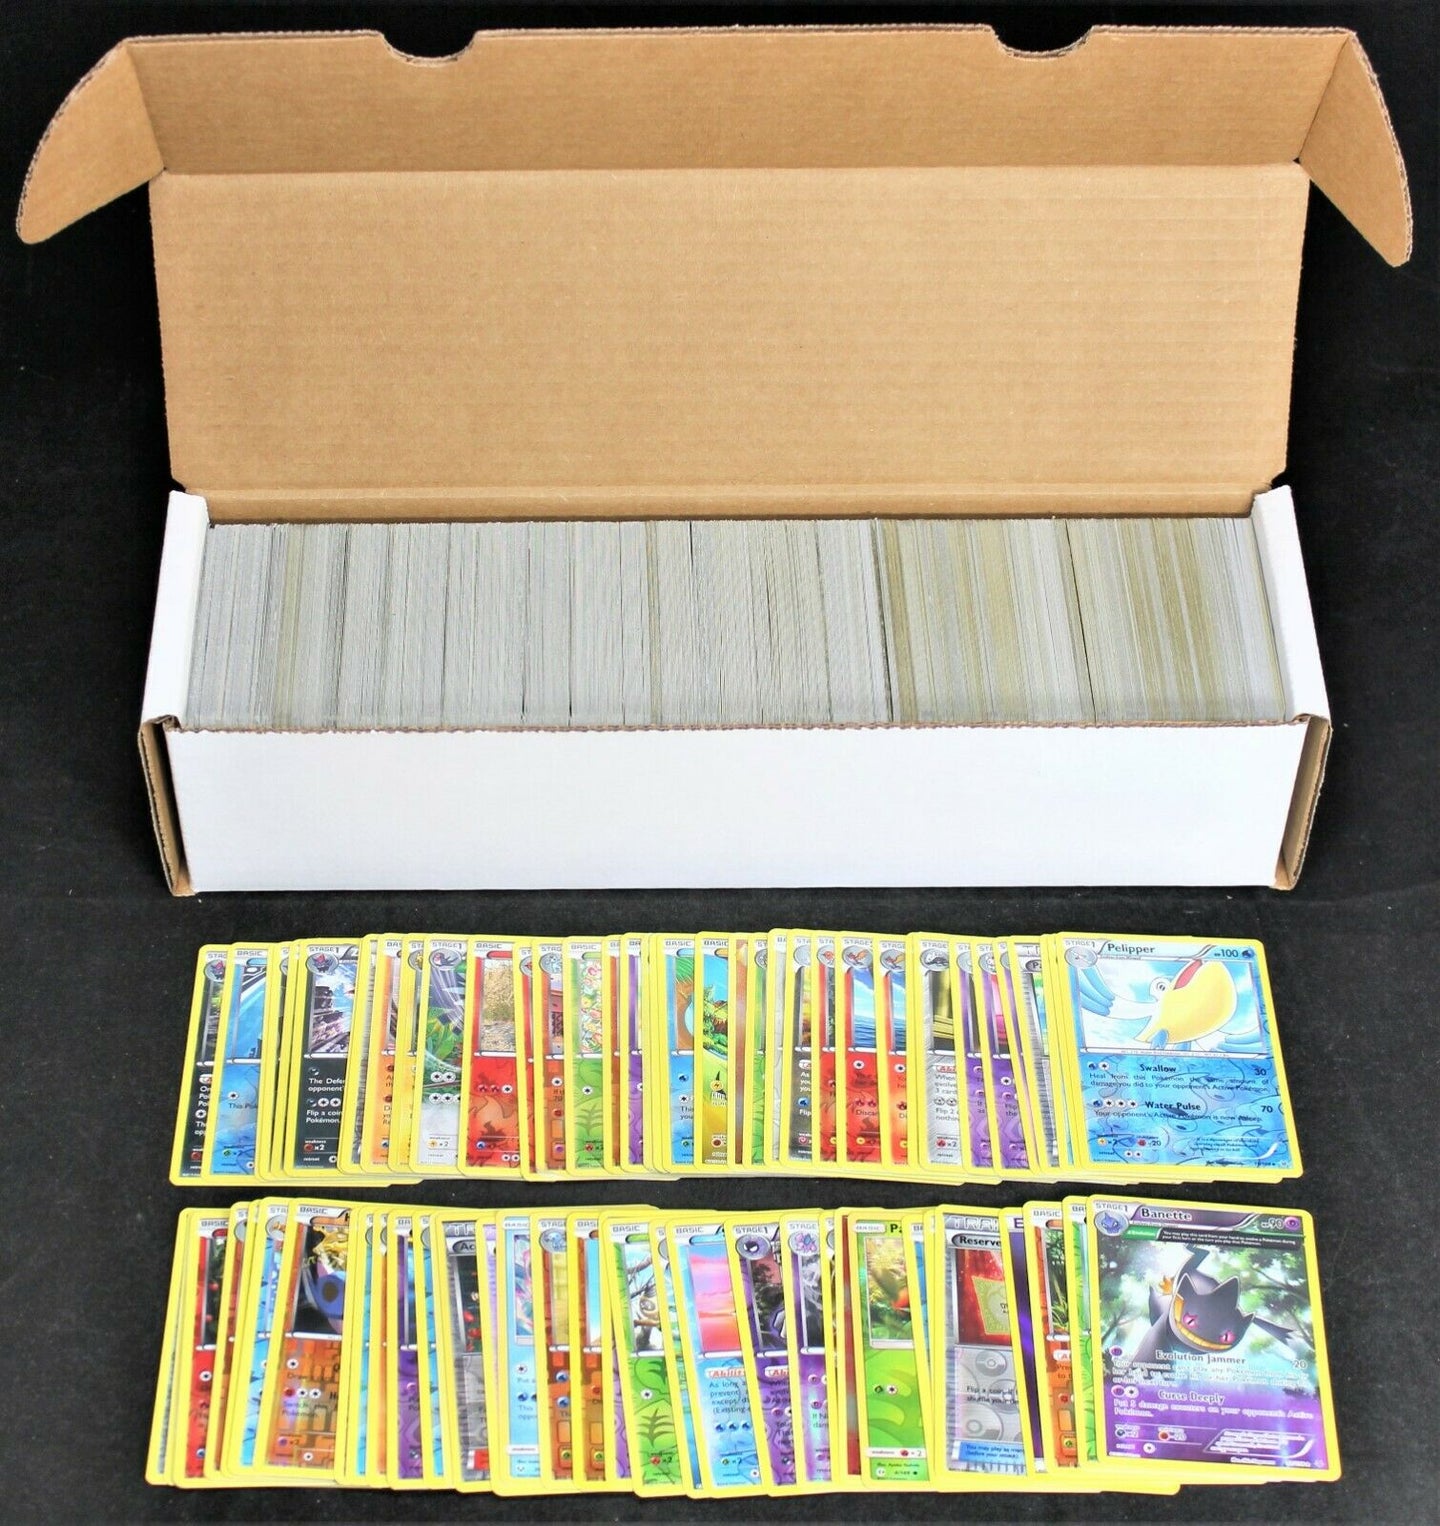 Pokémon Lot Over 500 Pokémon Cards Included - Comes with foil , Holo, and Ultra Rare Cards.